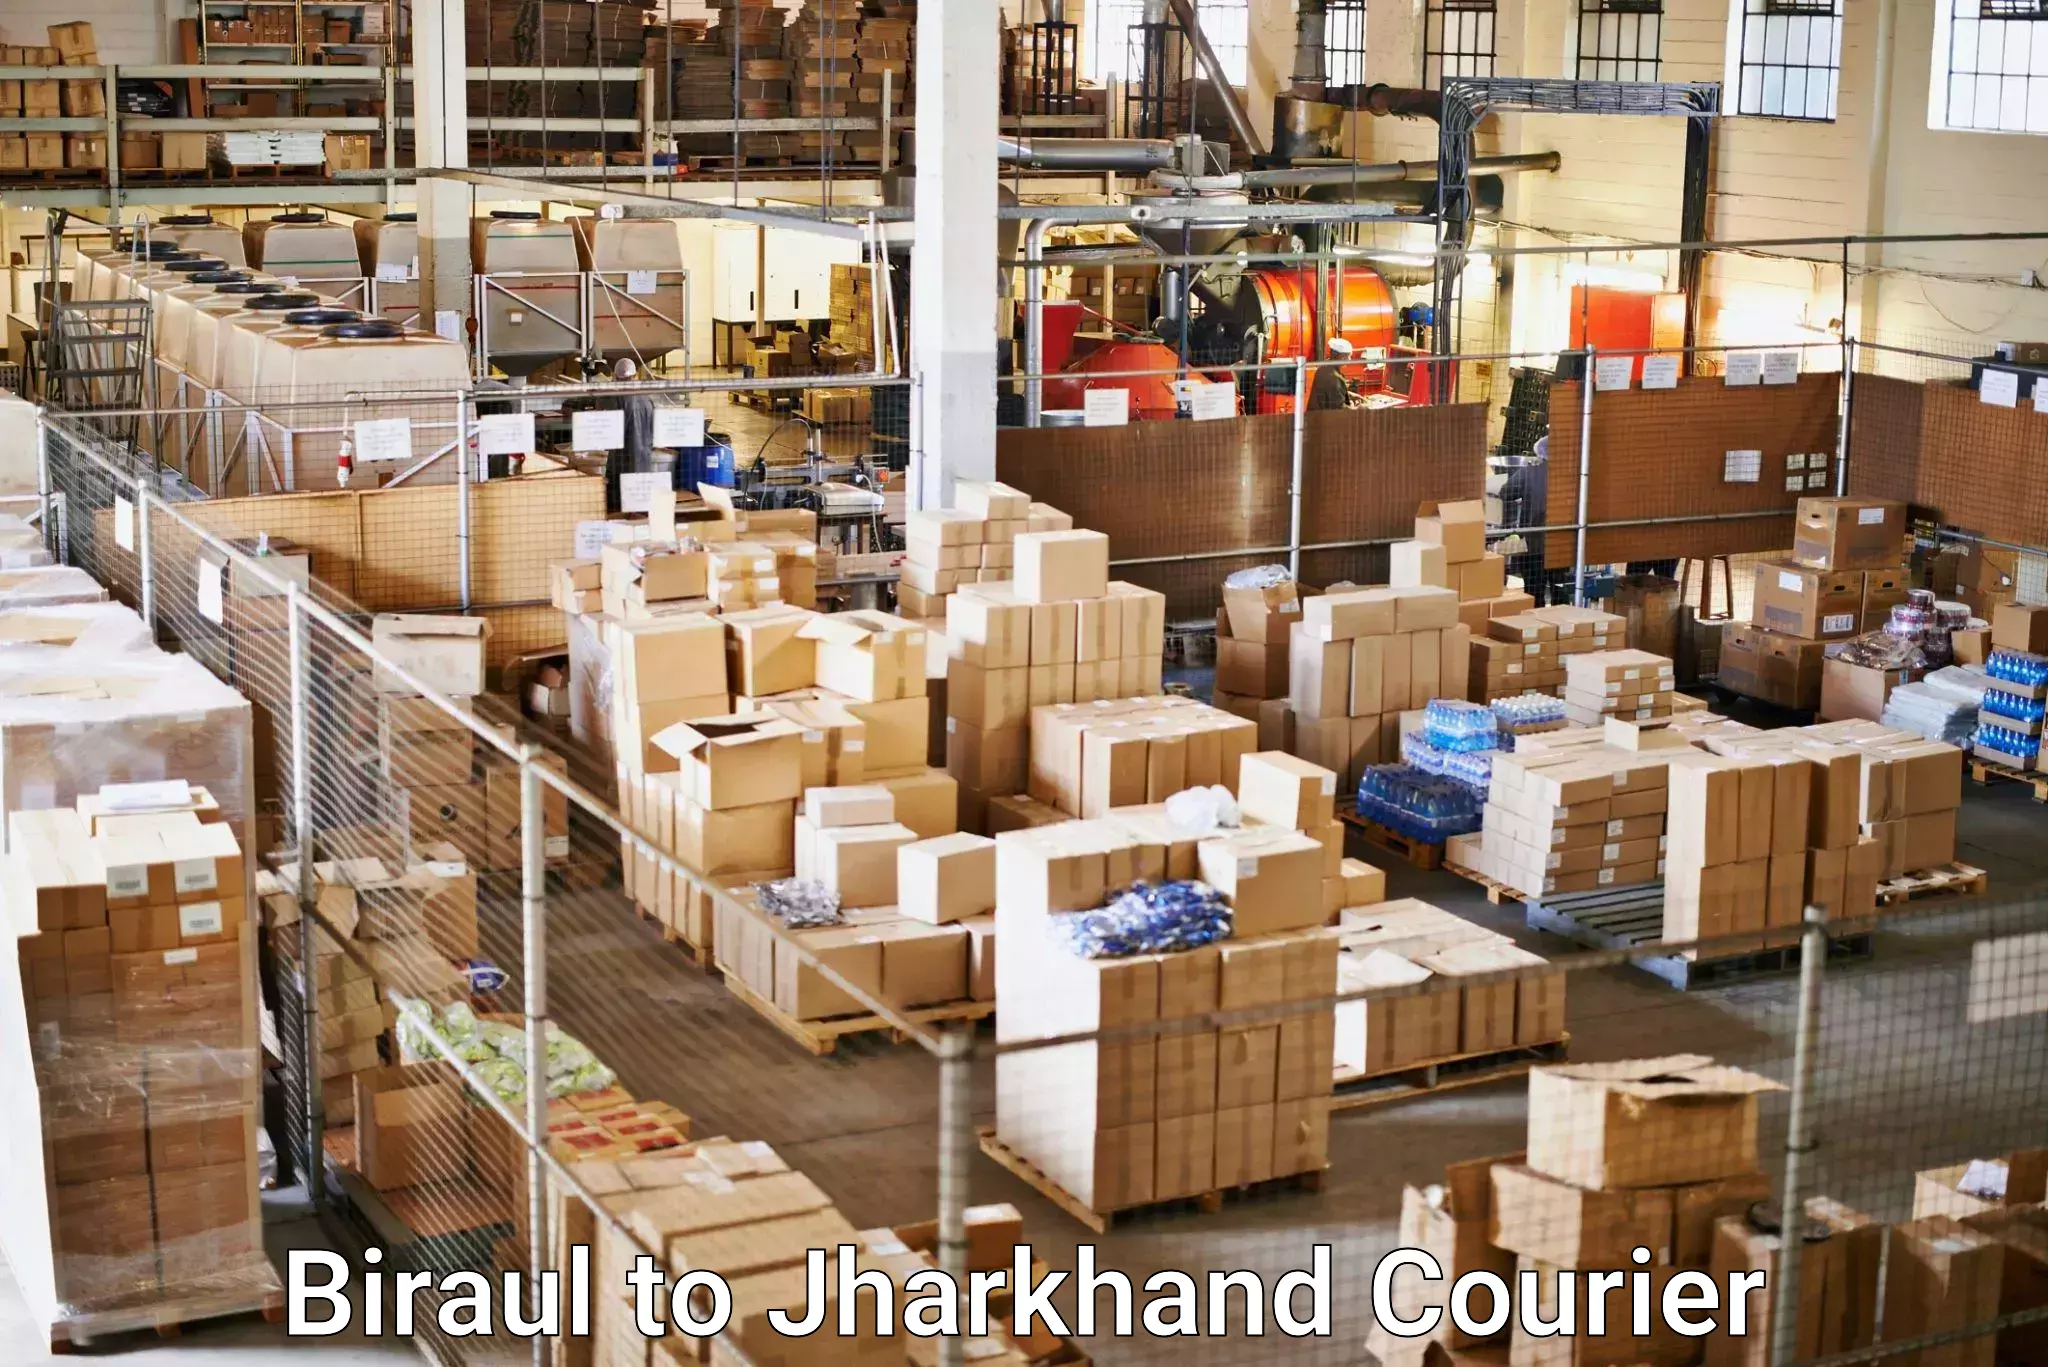 International courier rates in Biraul to Jamshedpur